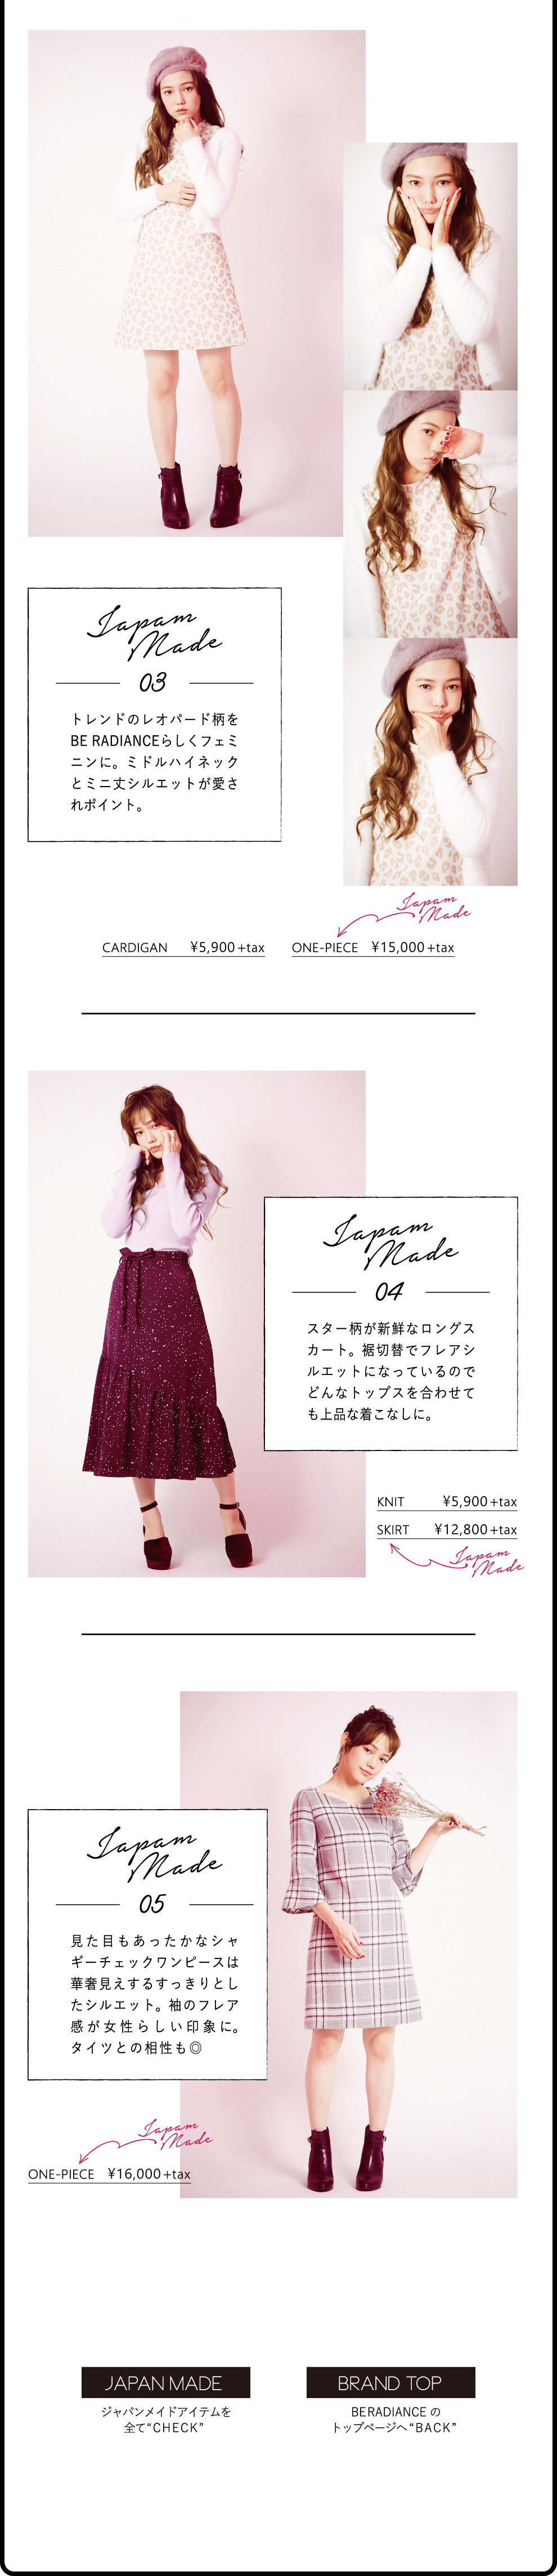 JAPAN MADE AUTUMN RECOMMENDED ITEM vol.2